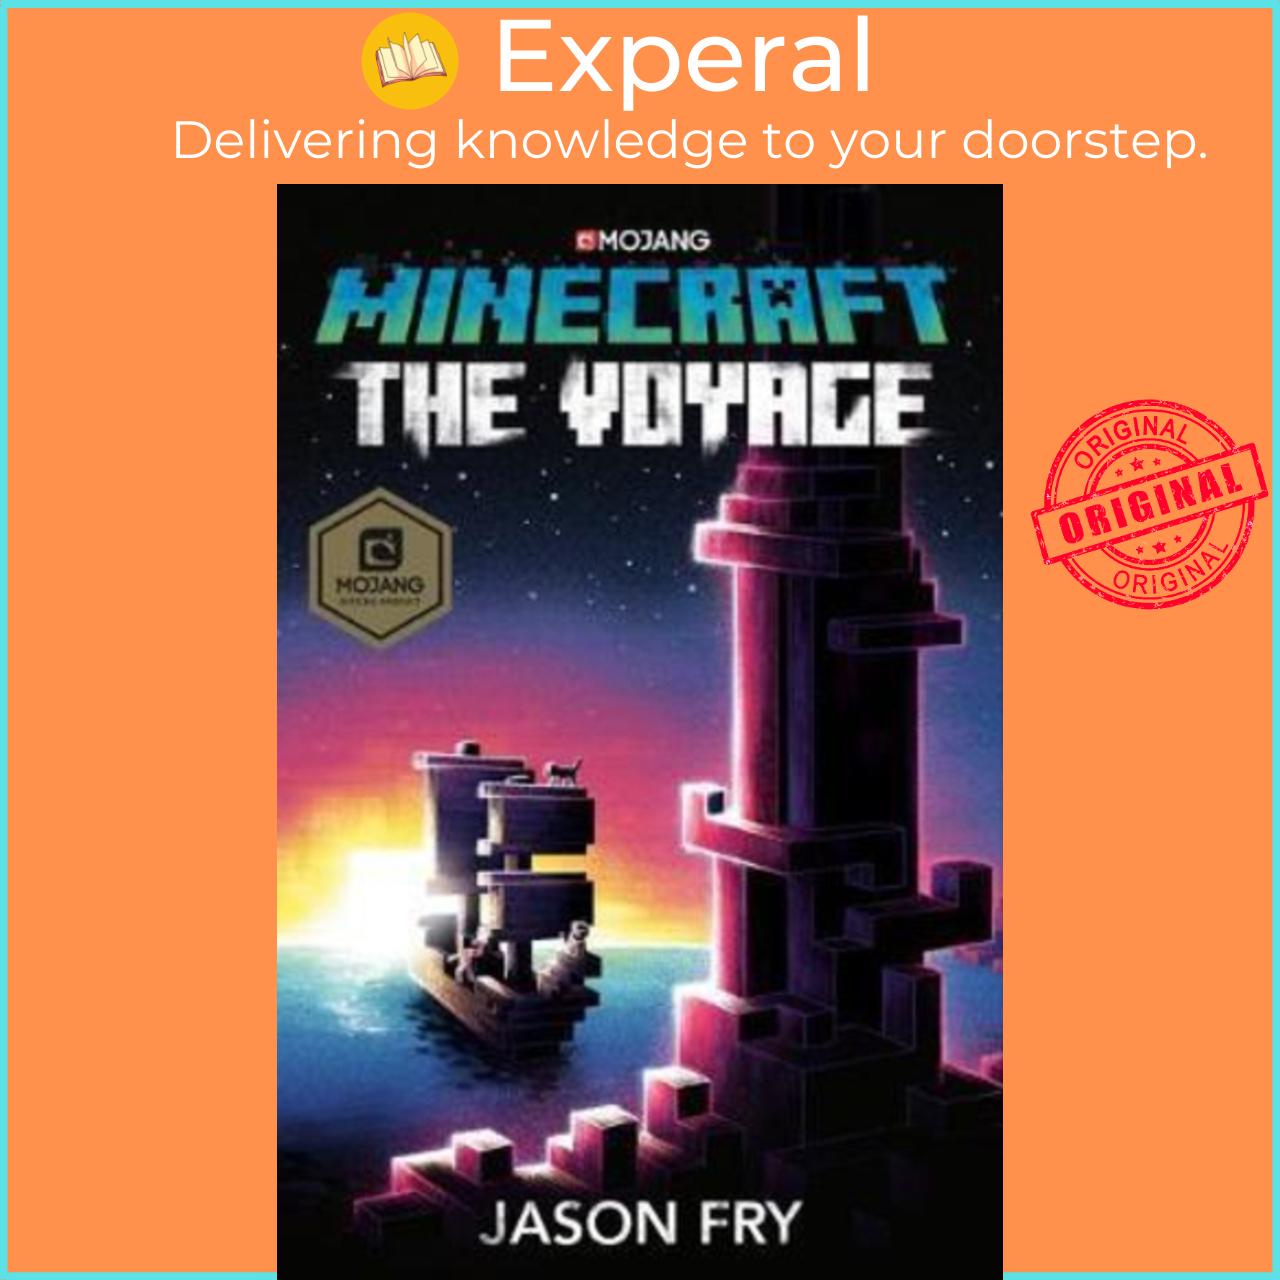 Sách - Minecraft: The Voyage : An Official Minecraft Novel by Jason Fry (US edition, hardcover)